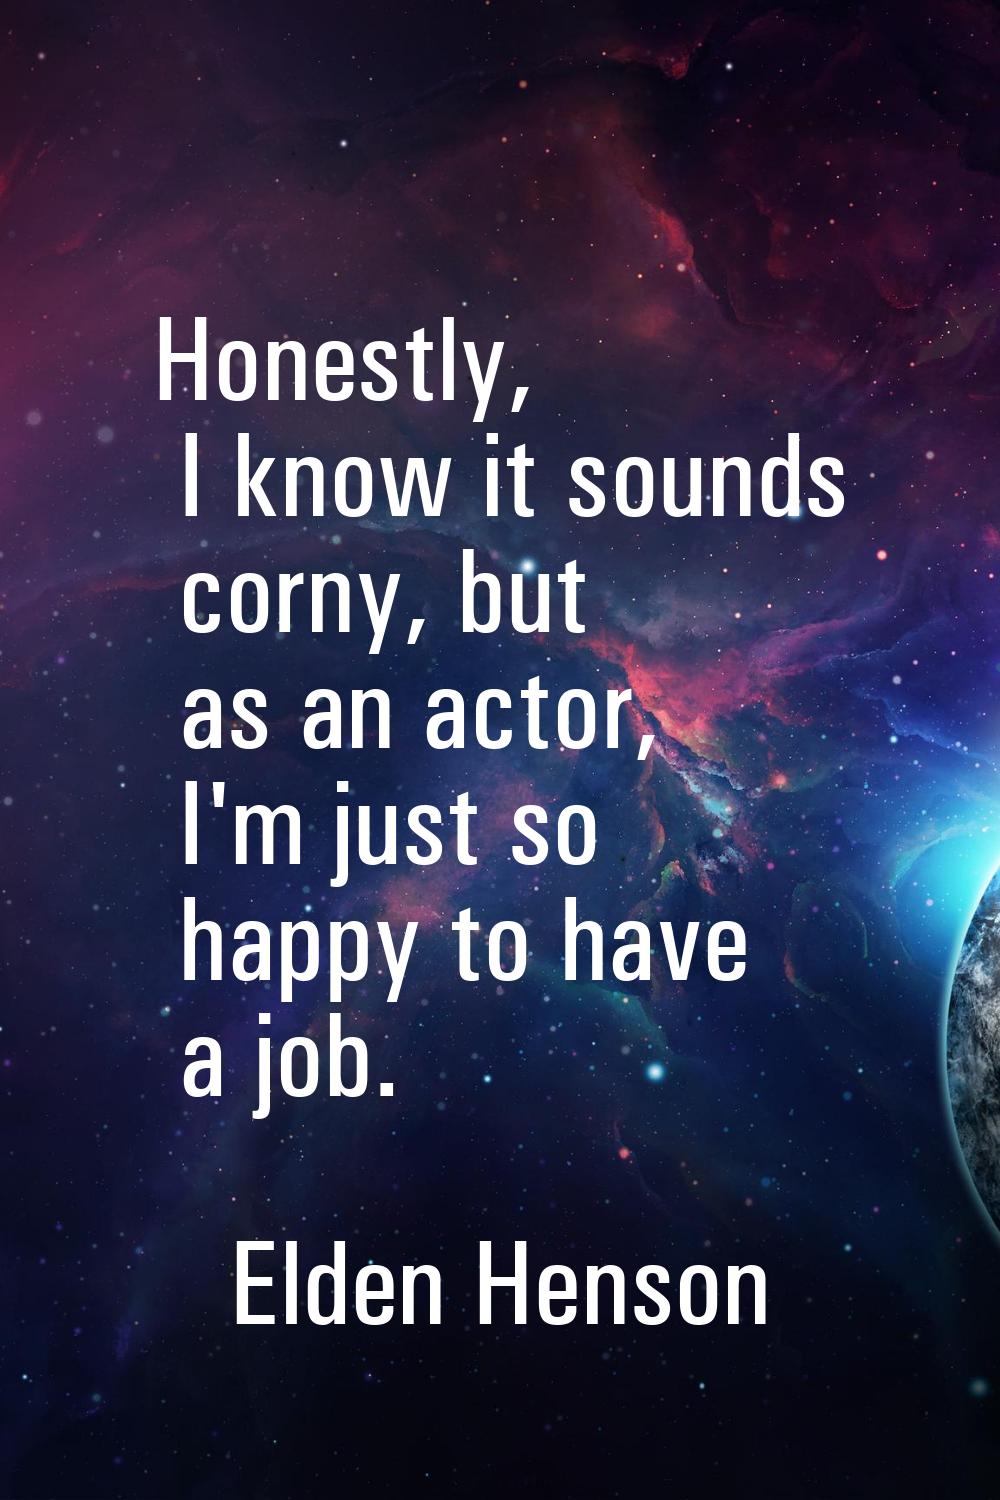 Honestly, I know it sounds corny, but as an actor, I'm just so happy to have a job.